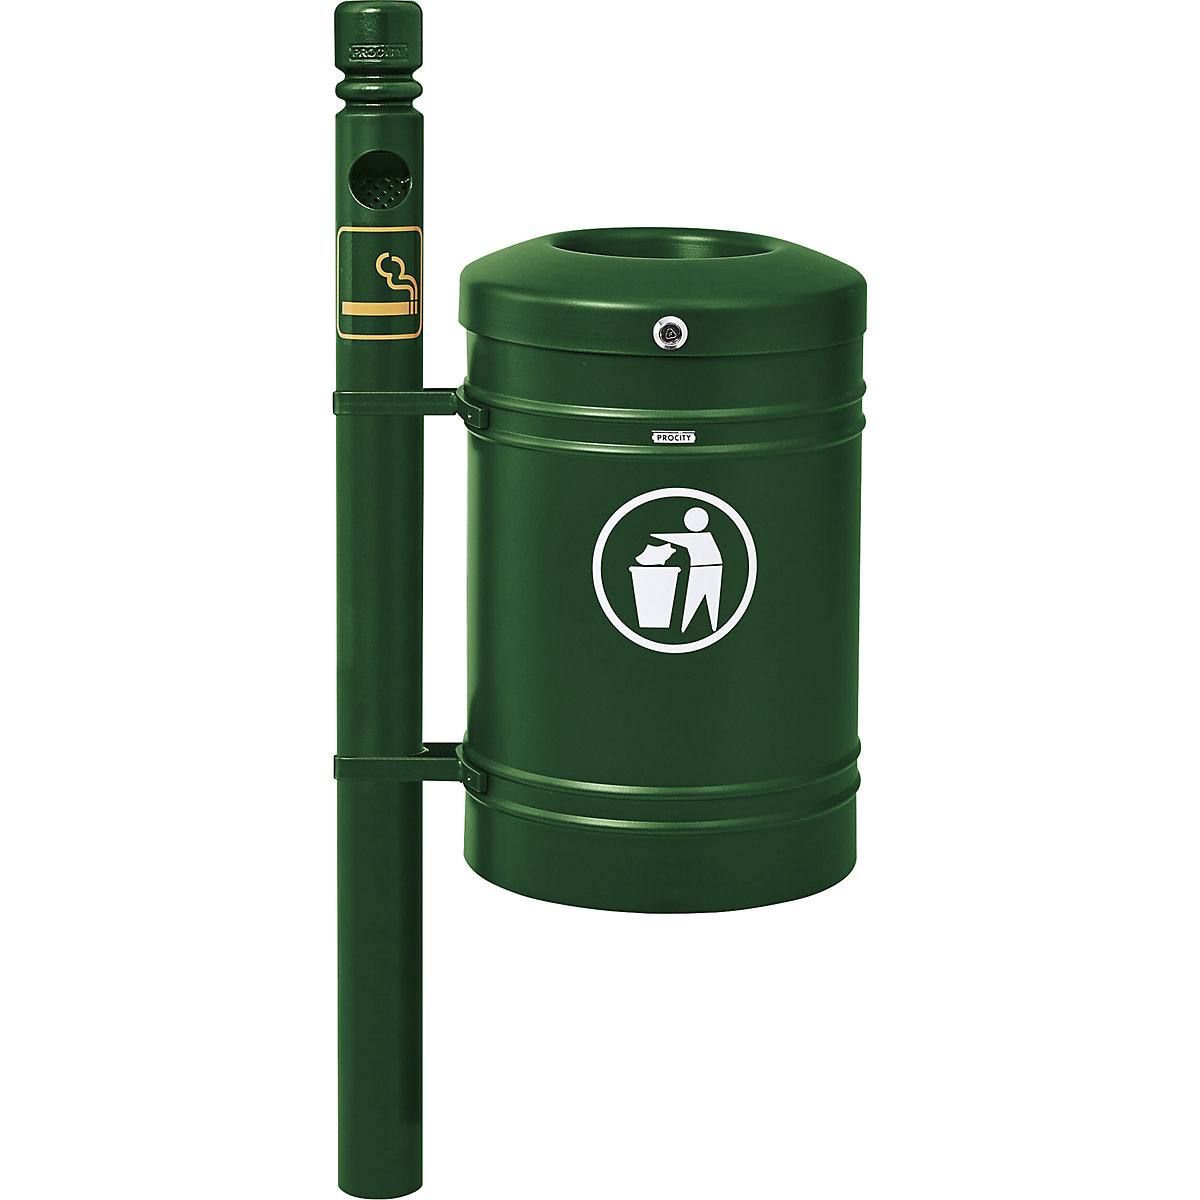 GUSTAVIA outdoor waste collector – PROCITY, capacity 40 l, with ashtray, green-2